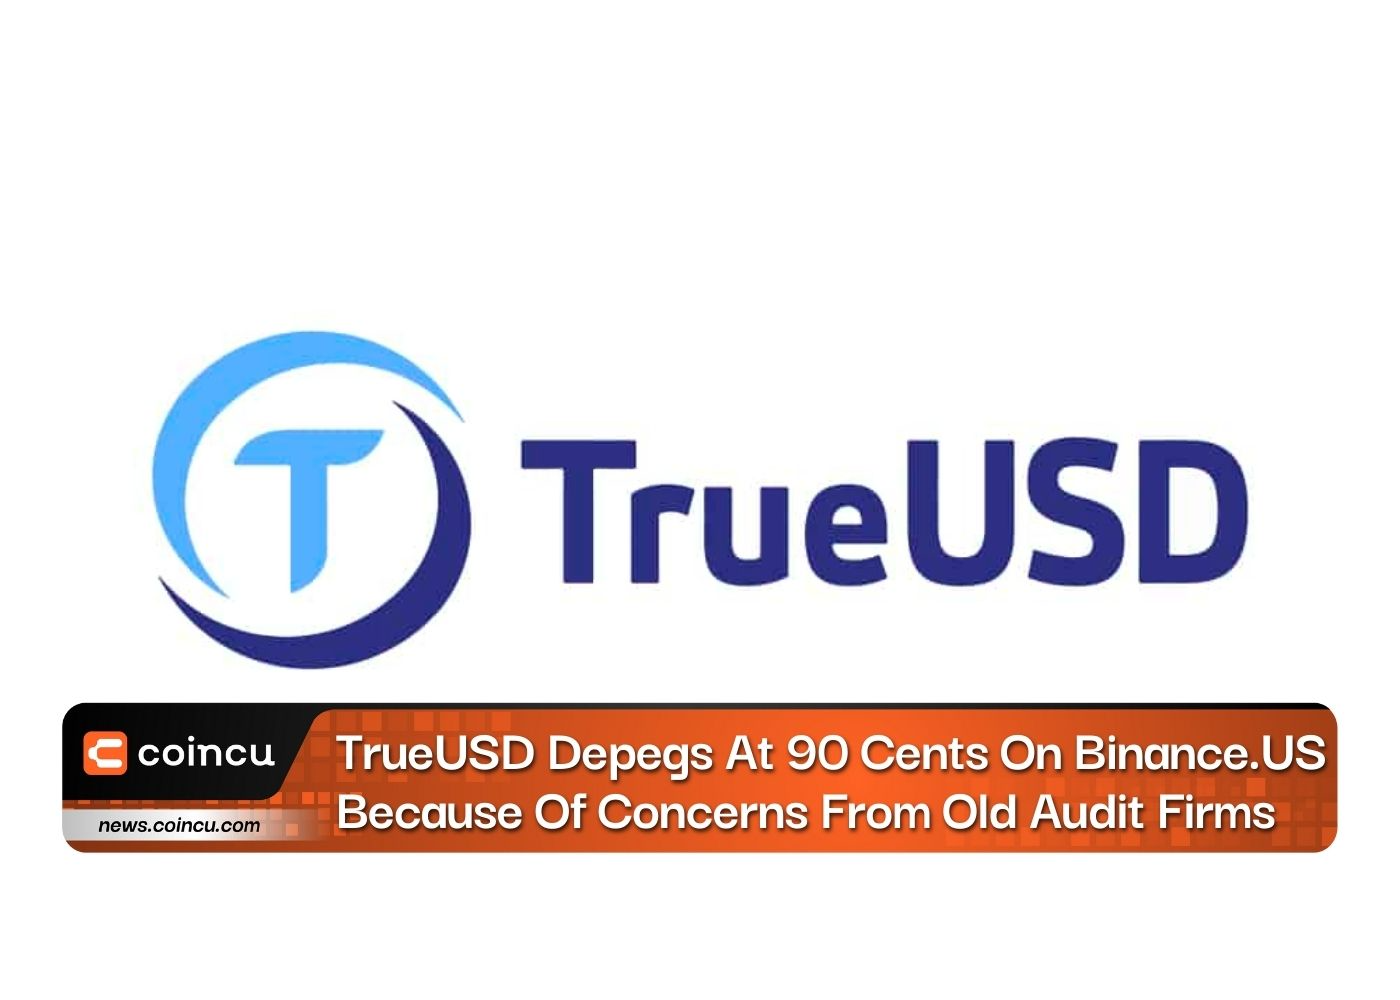 TrueUSD Depegs At 90 Cents On Binance.US Because Of Concerns From Old Audit Firms